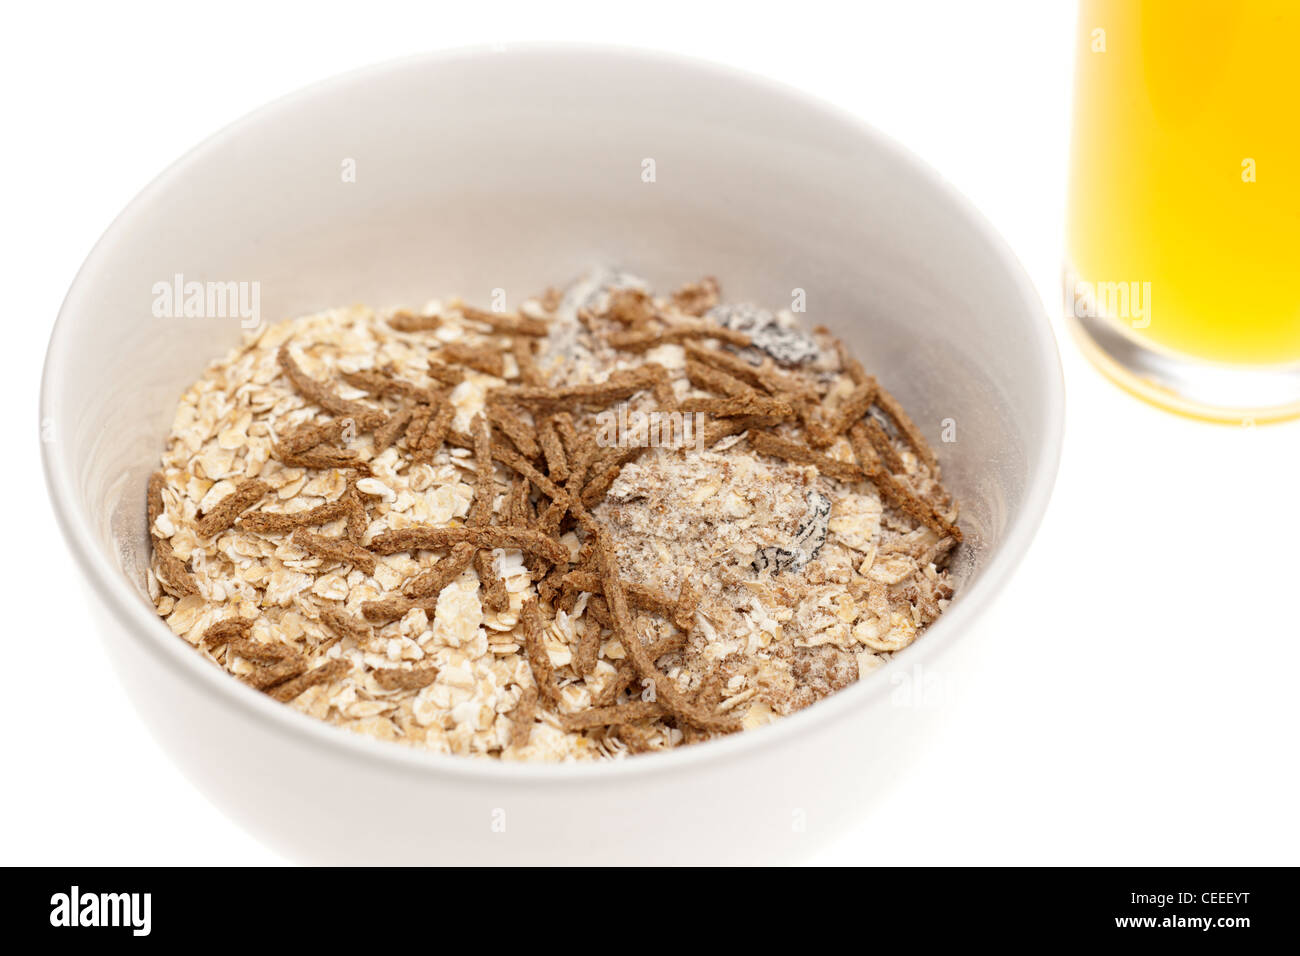 Plain white cereal bowl filled with Muesli and rolled oats with a sprinkling of bran flakes Stock Photo